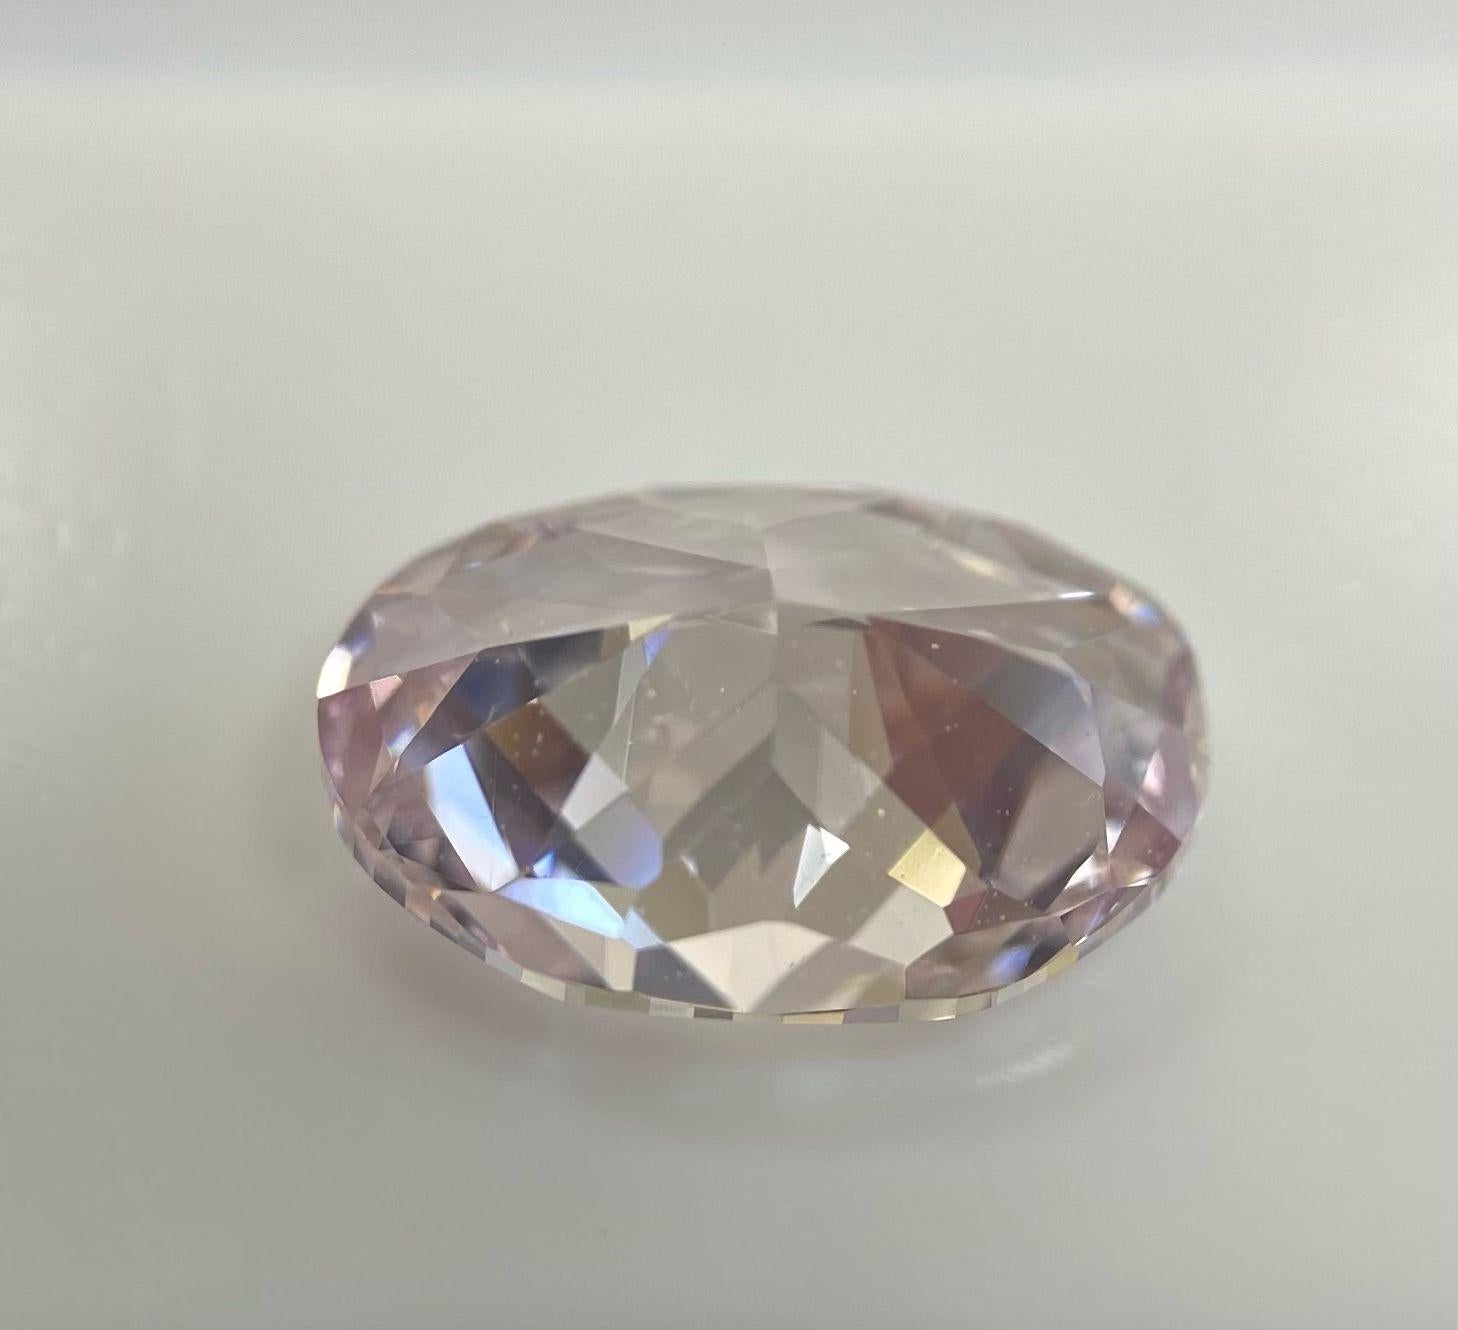 Kindly notice: This is a loose diamond, it is not mounted on any jewelry item.

GIA Report #1353154172

Shape & Cutting Style: Oval Modified Brilliant.
Measurements: 7.79x5.42x3.23mm.
Carat Weight: 1.03 Carat.
Color Grade: Fancy Light Pink.
Color